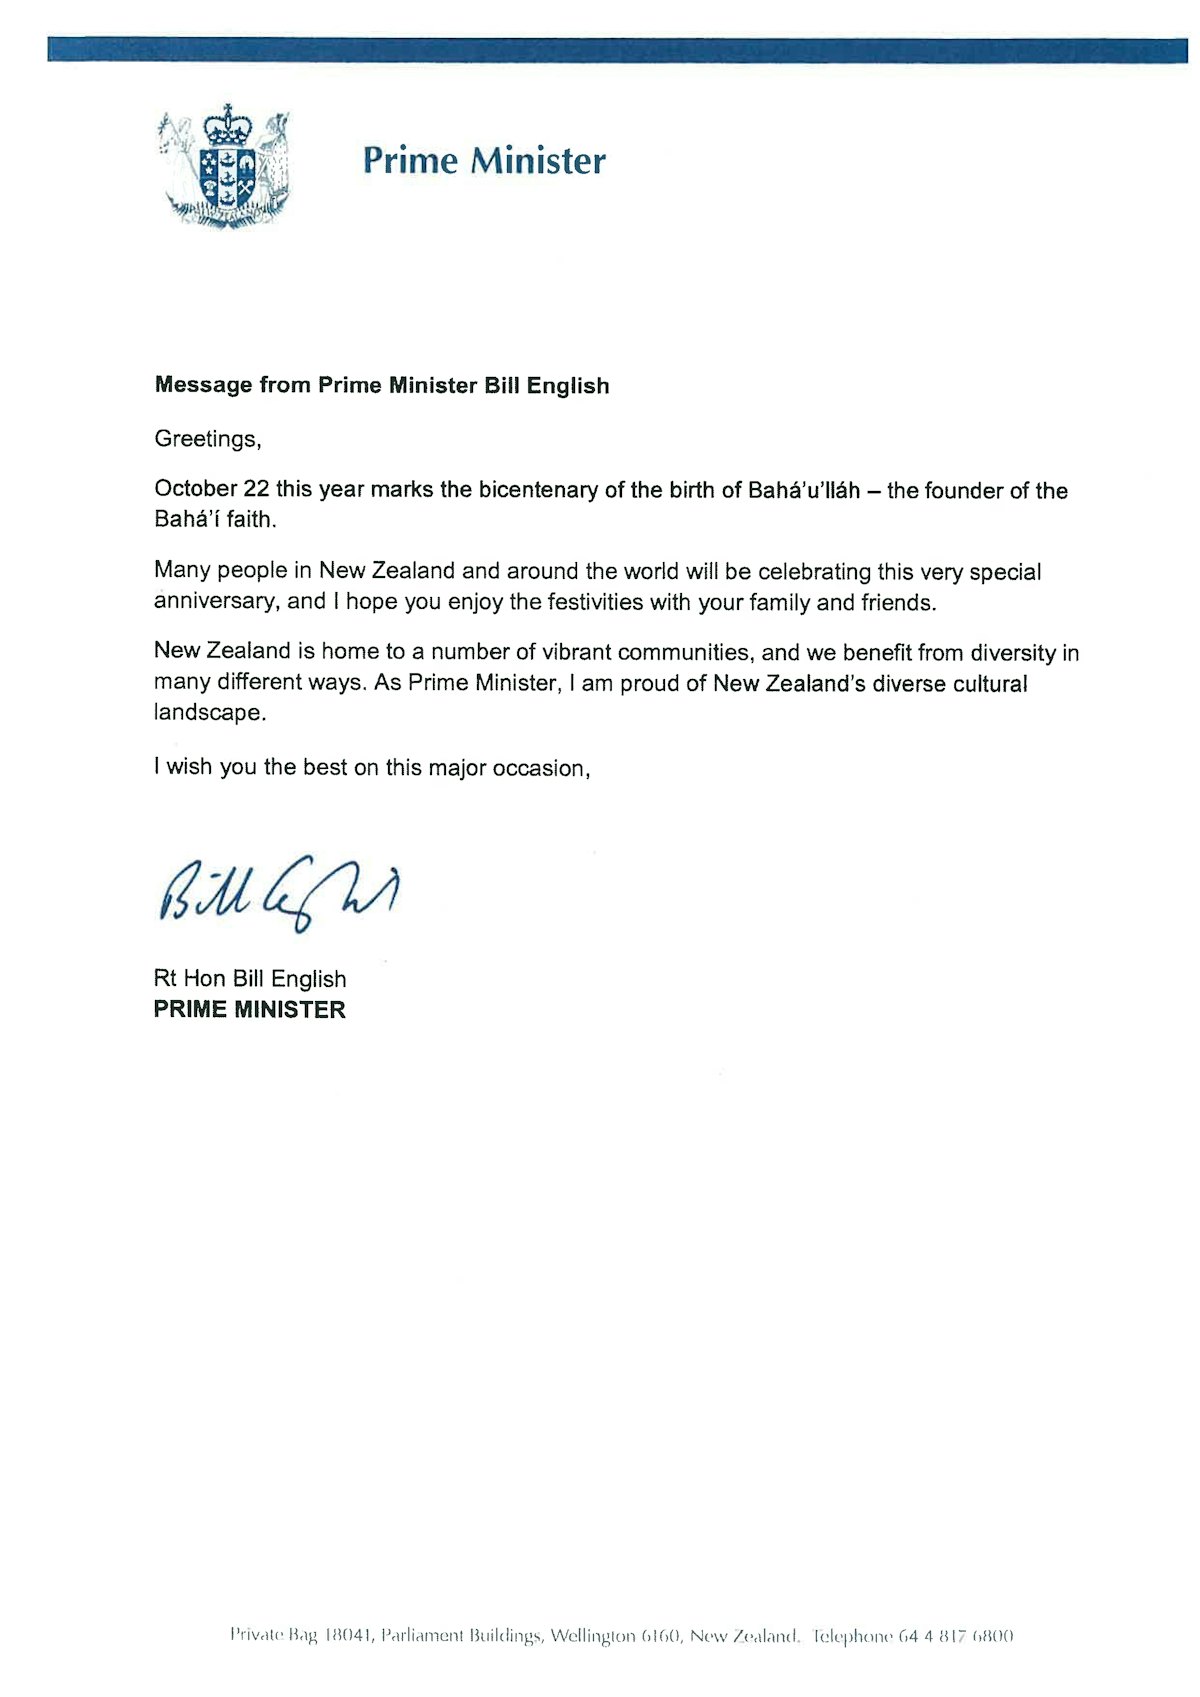 A letter of greeting from New Zealand Prime Minister Bill English to the Baha'i community there